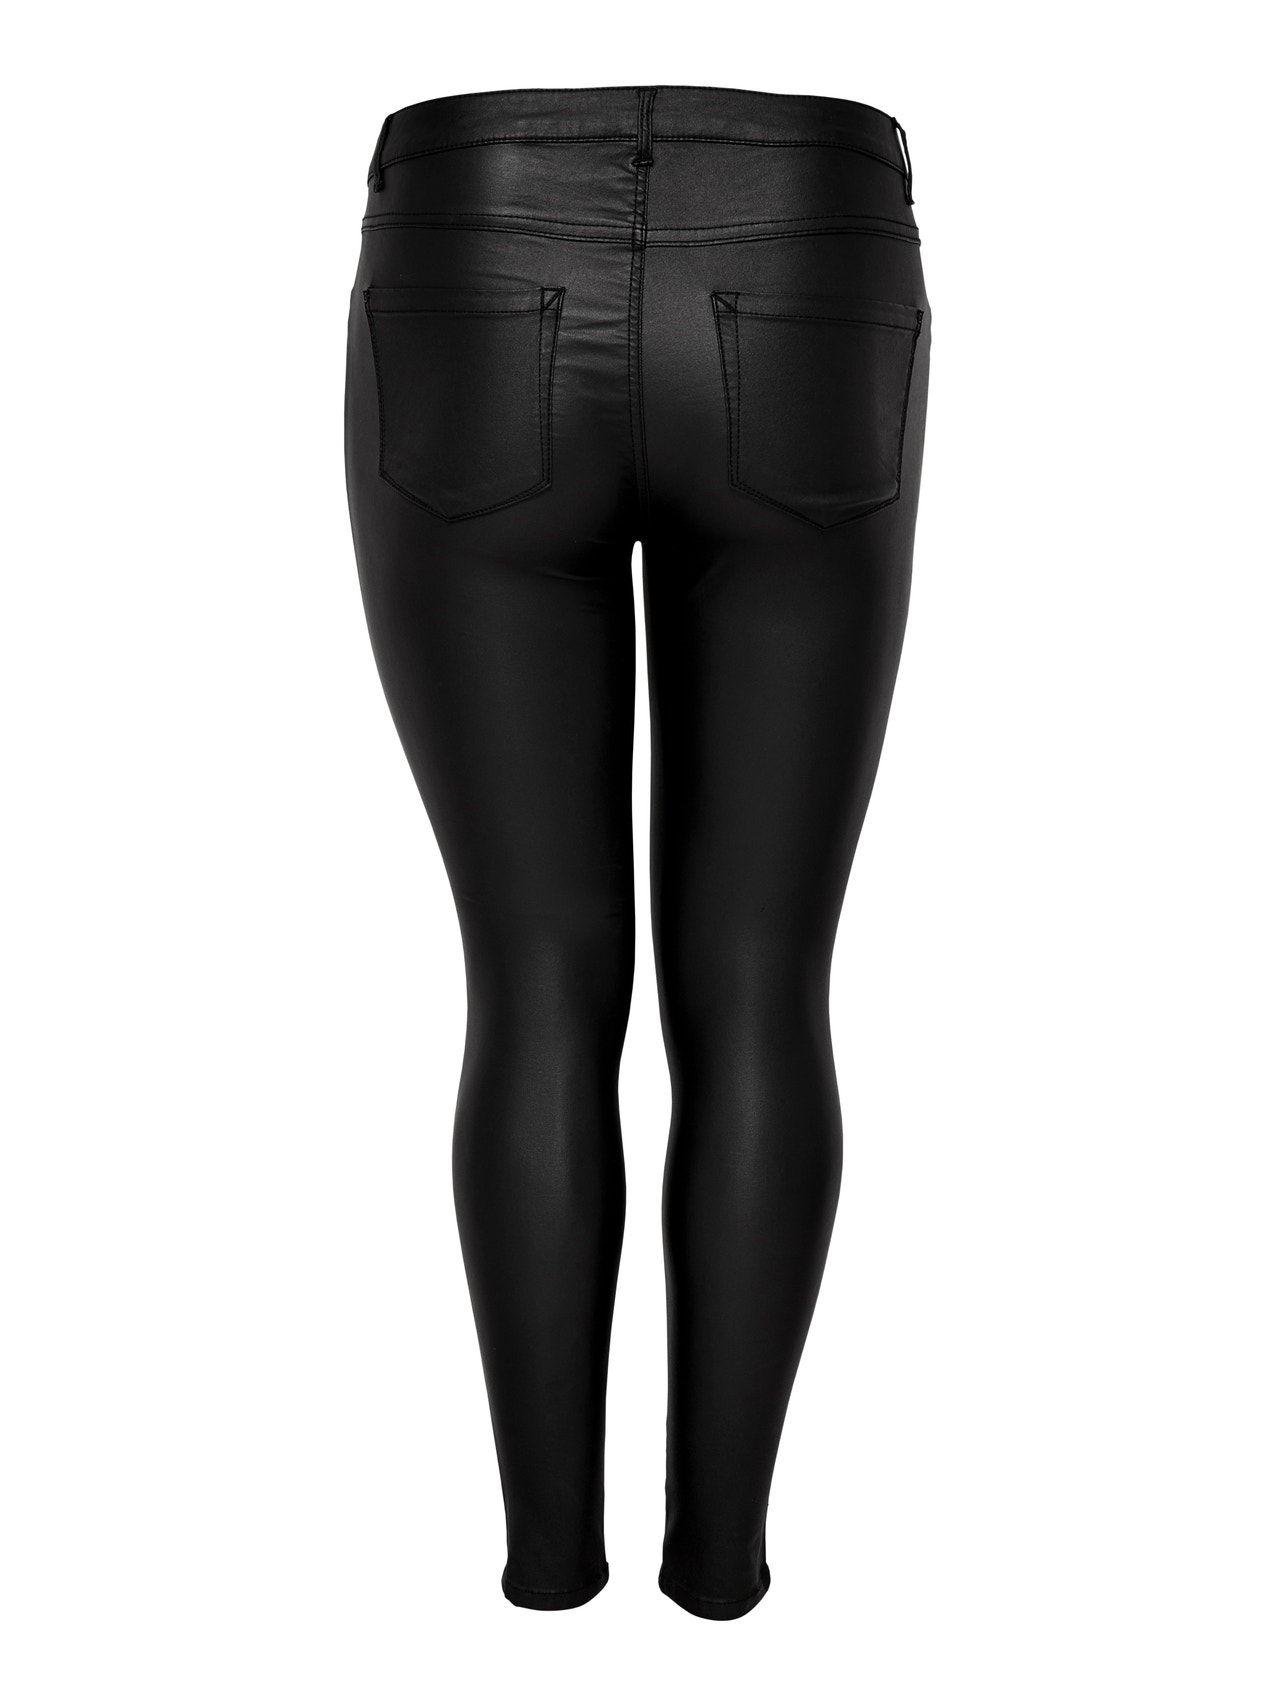 ONLY Skinny fit Jeans -Black - 15174940